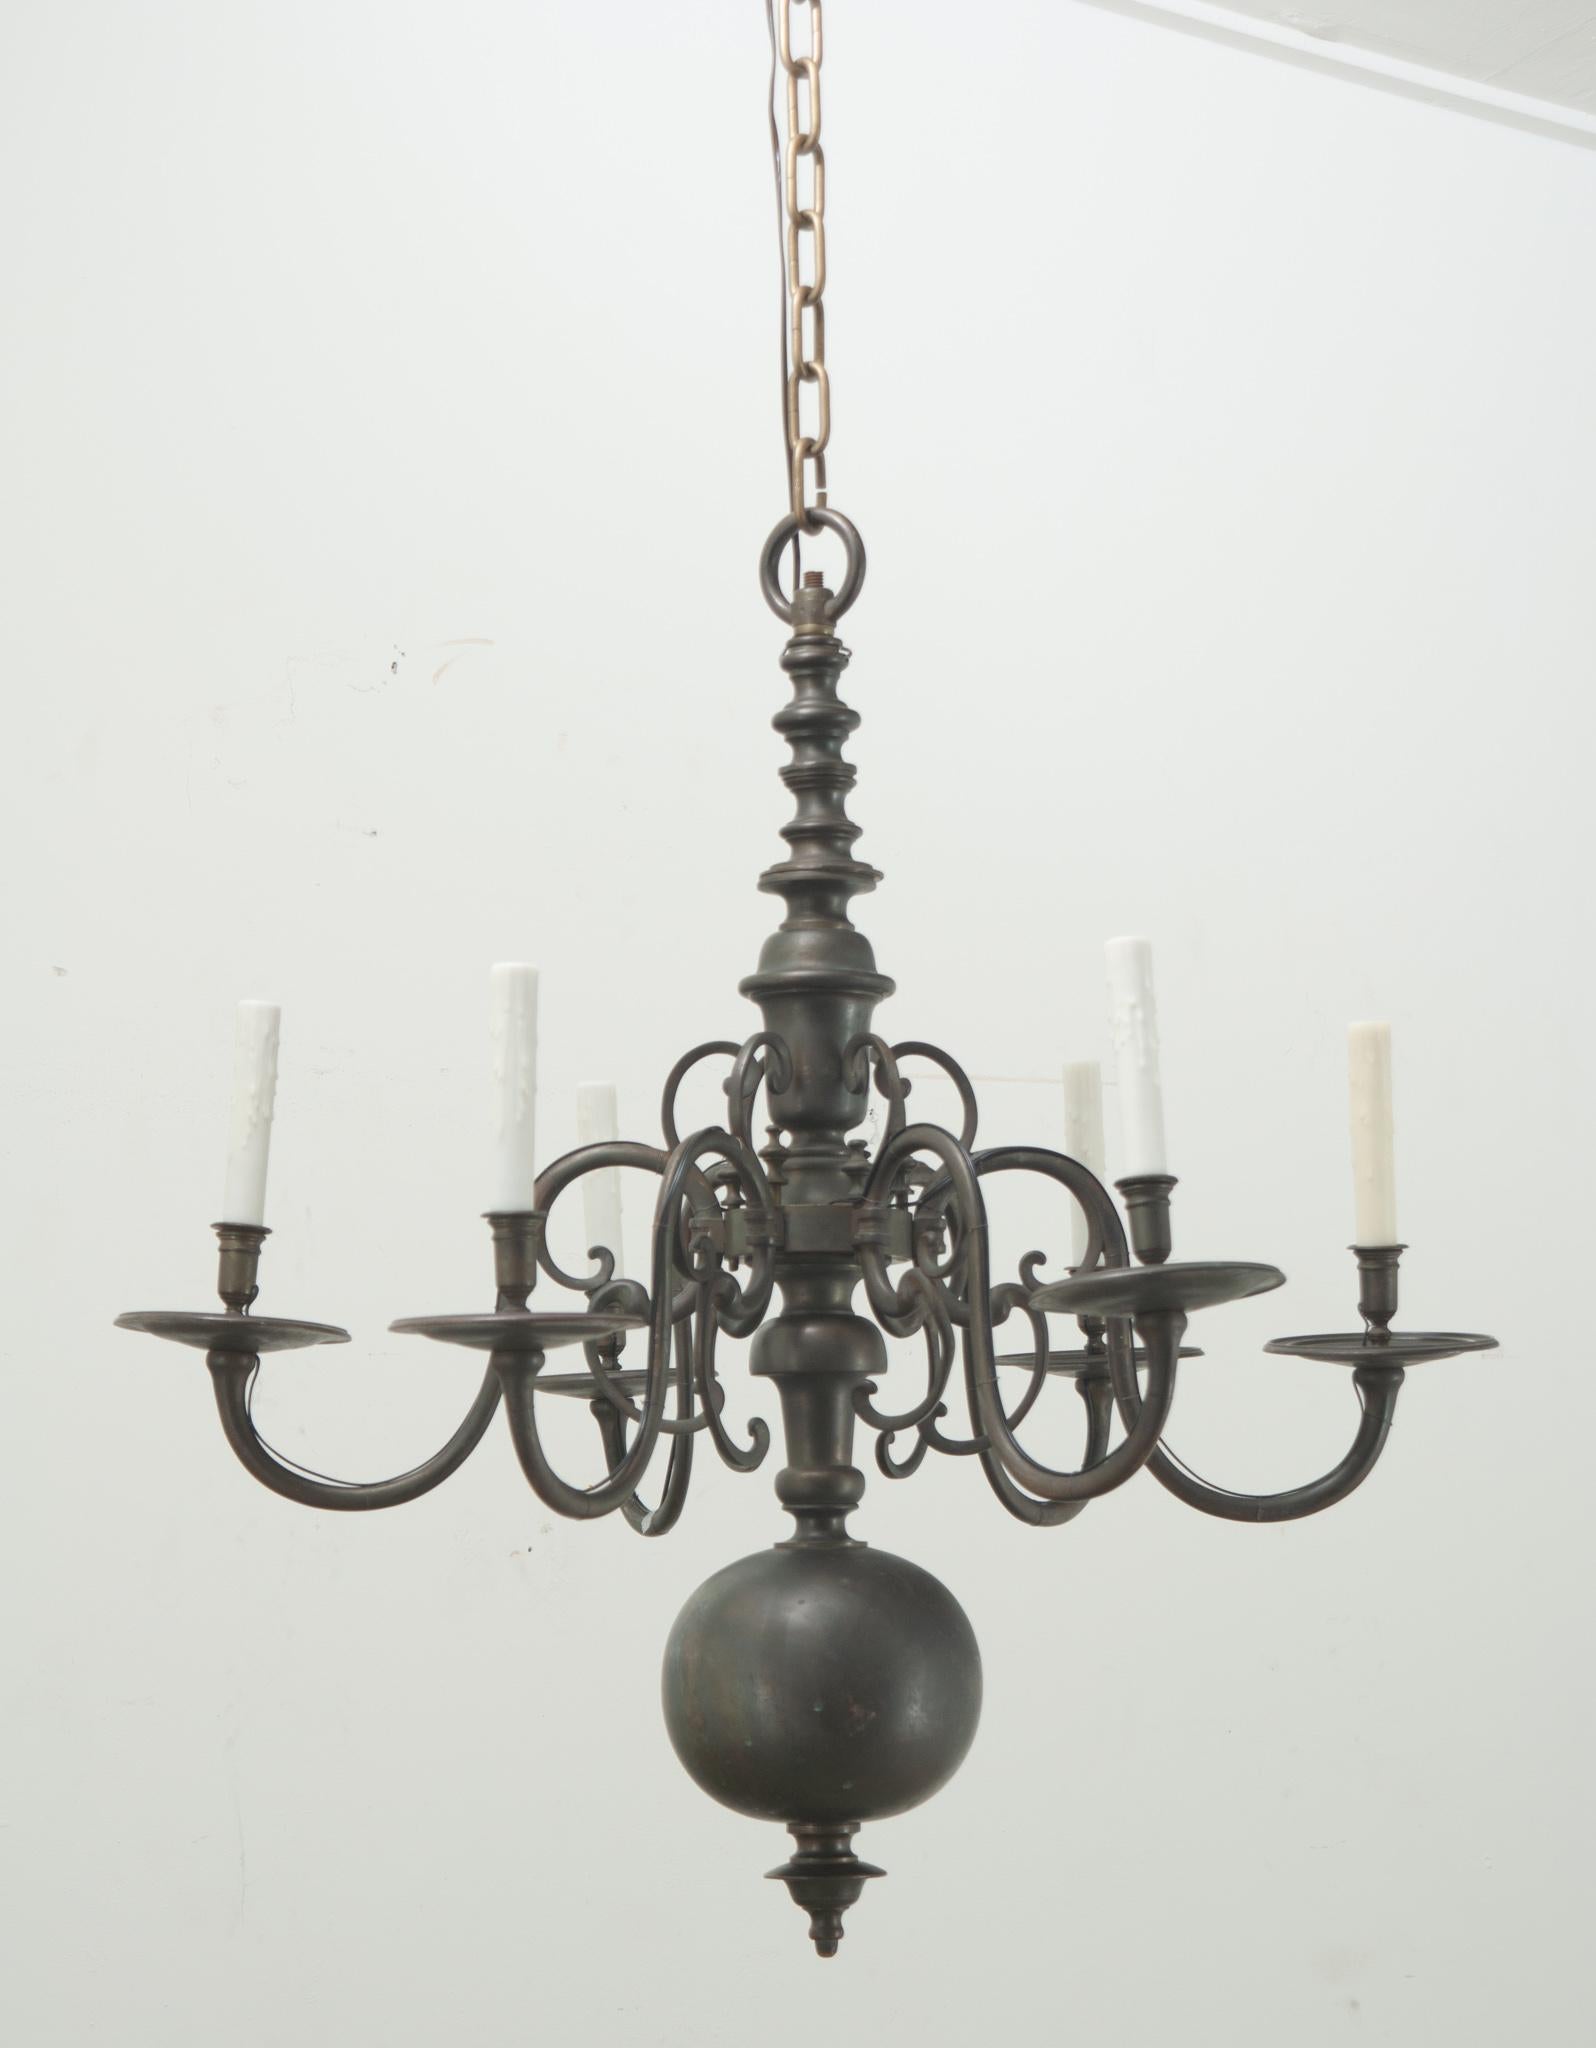 A large antique six light heavily patinated brass chandelier. The center of this fixture is turned and shaped and ends with a substantial ball finial. There are six curving arms with tall faux candle covers. This chandelier has been cleaned and